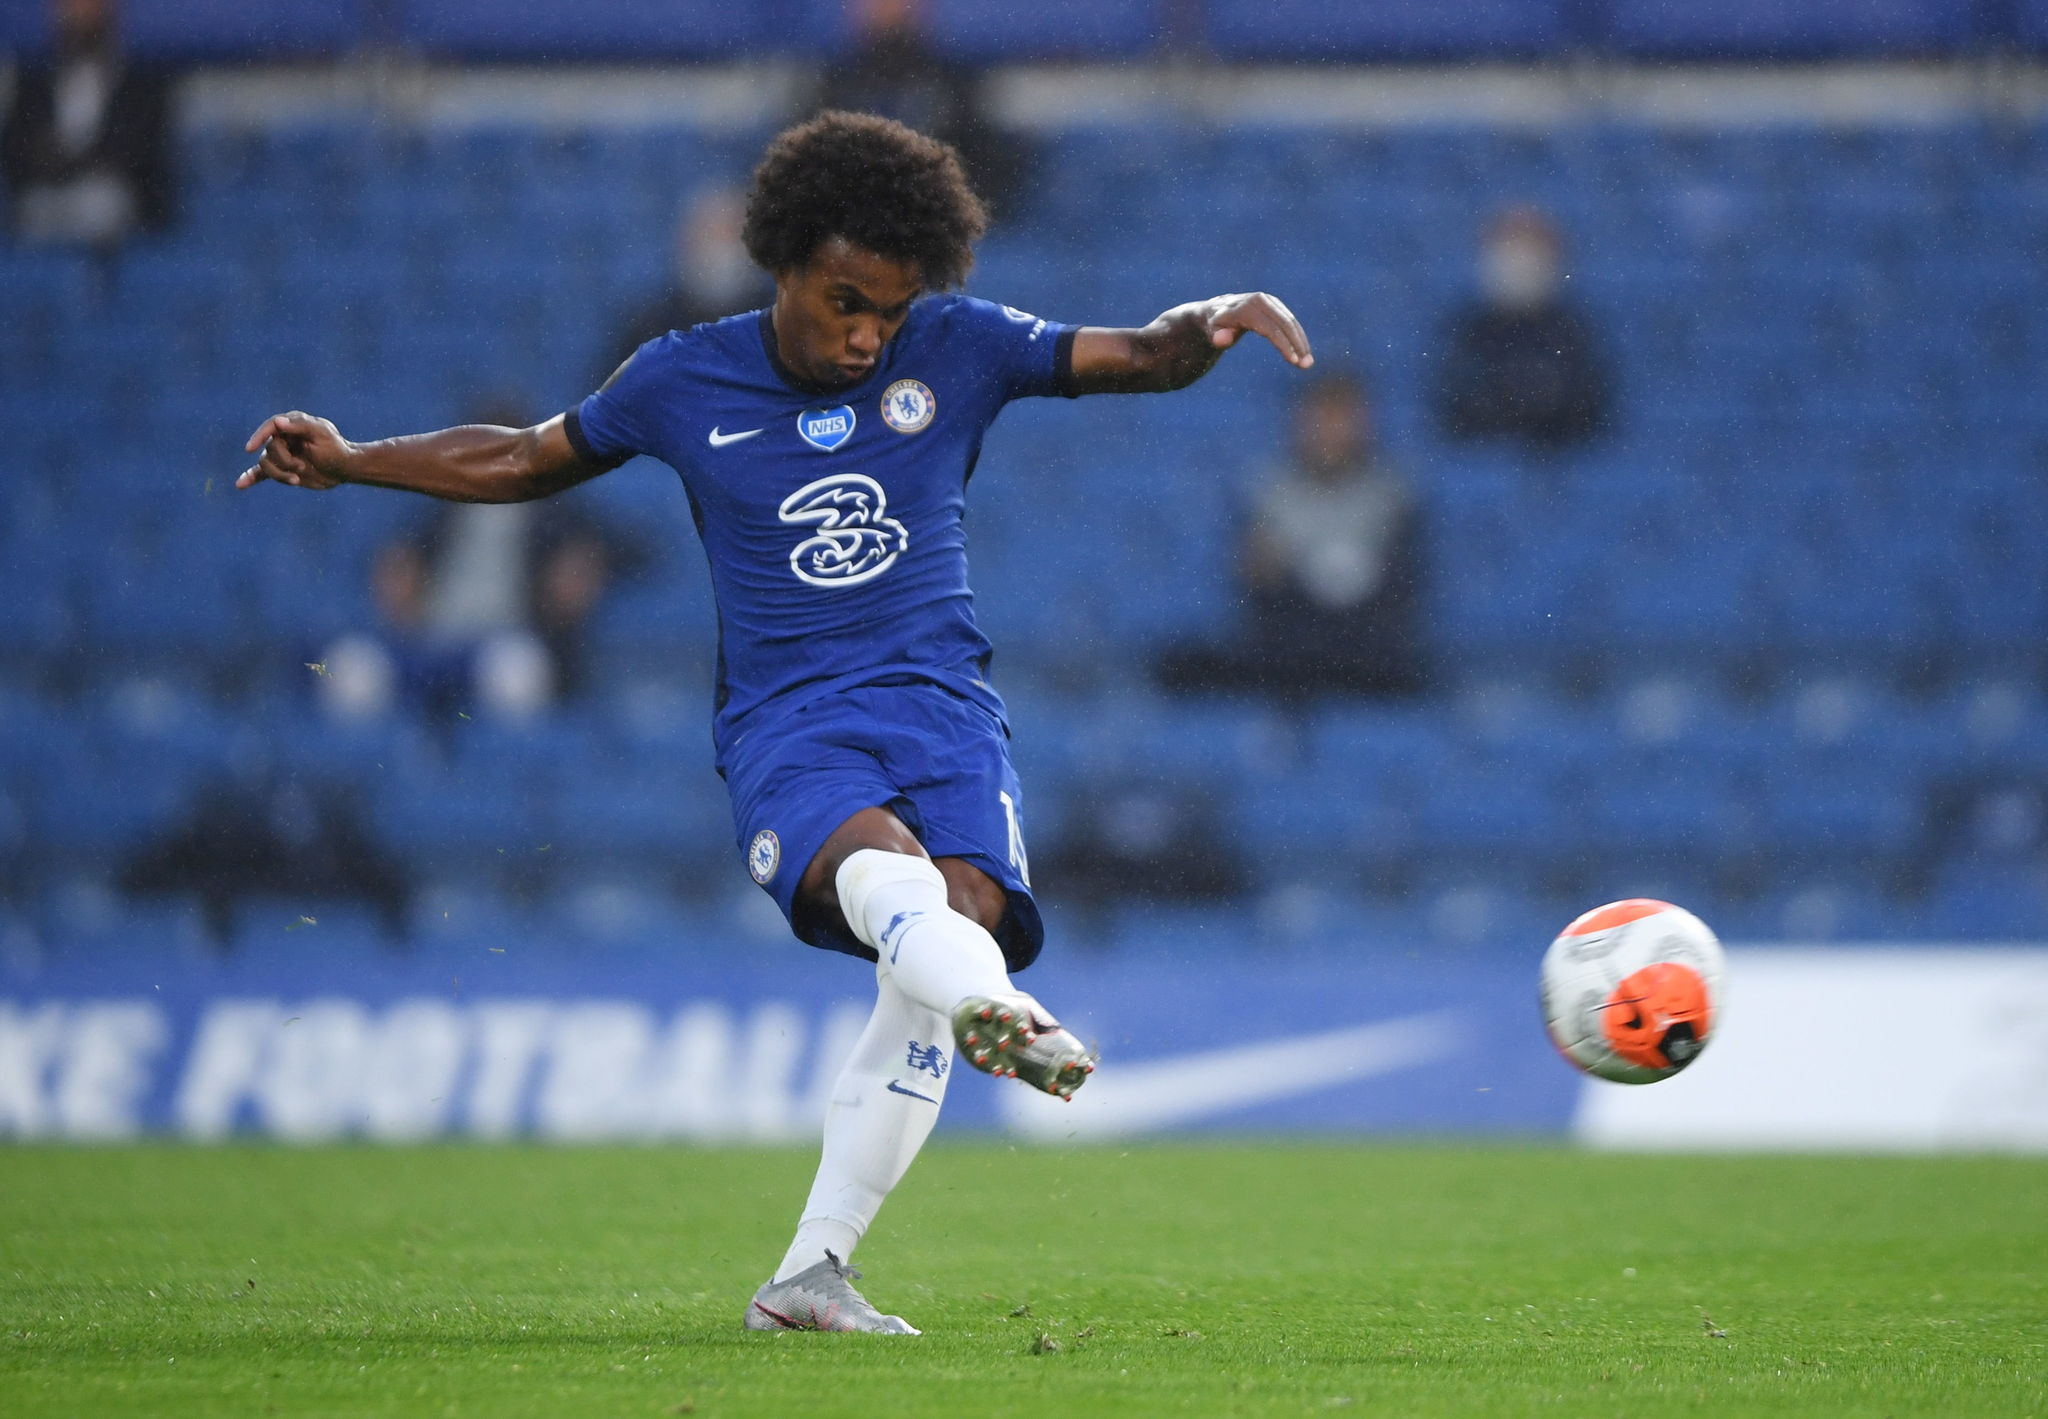 London (United Kingdom), 04/07/2020.- Willian of lt;HIT gt;Chelsea lt;/HIT gt; in action during the English Premier League match between lt;HIT gt;Chelsea lt;/HIT gt; and Watford in London Britain, 04 July 2020. (Reino Unido, Londres) EFE/EPA/Mike Hewitt/NMC/Pool EDITORIAL USE ONLY. No use with unauthorized audio, video, data, fixture lists, club/league logos or live services. Online in-match use limited to 120 images, no video emulation. No use in betting, games or single club/league/player publications